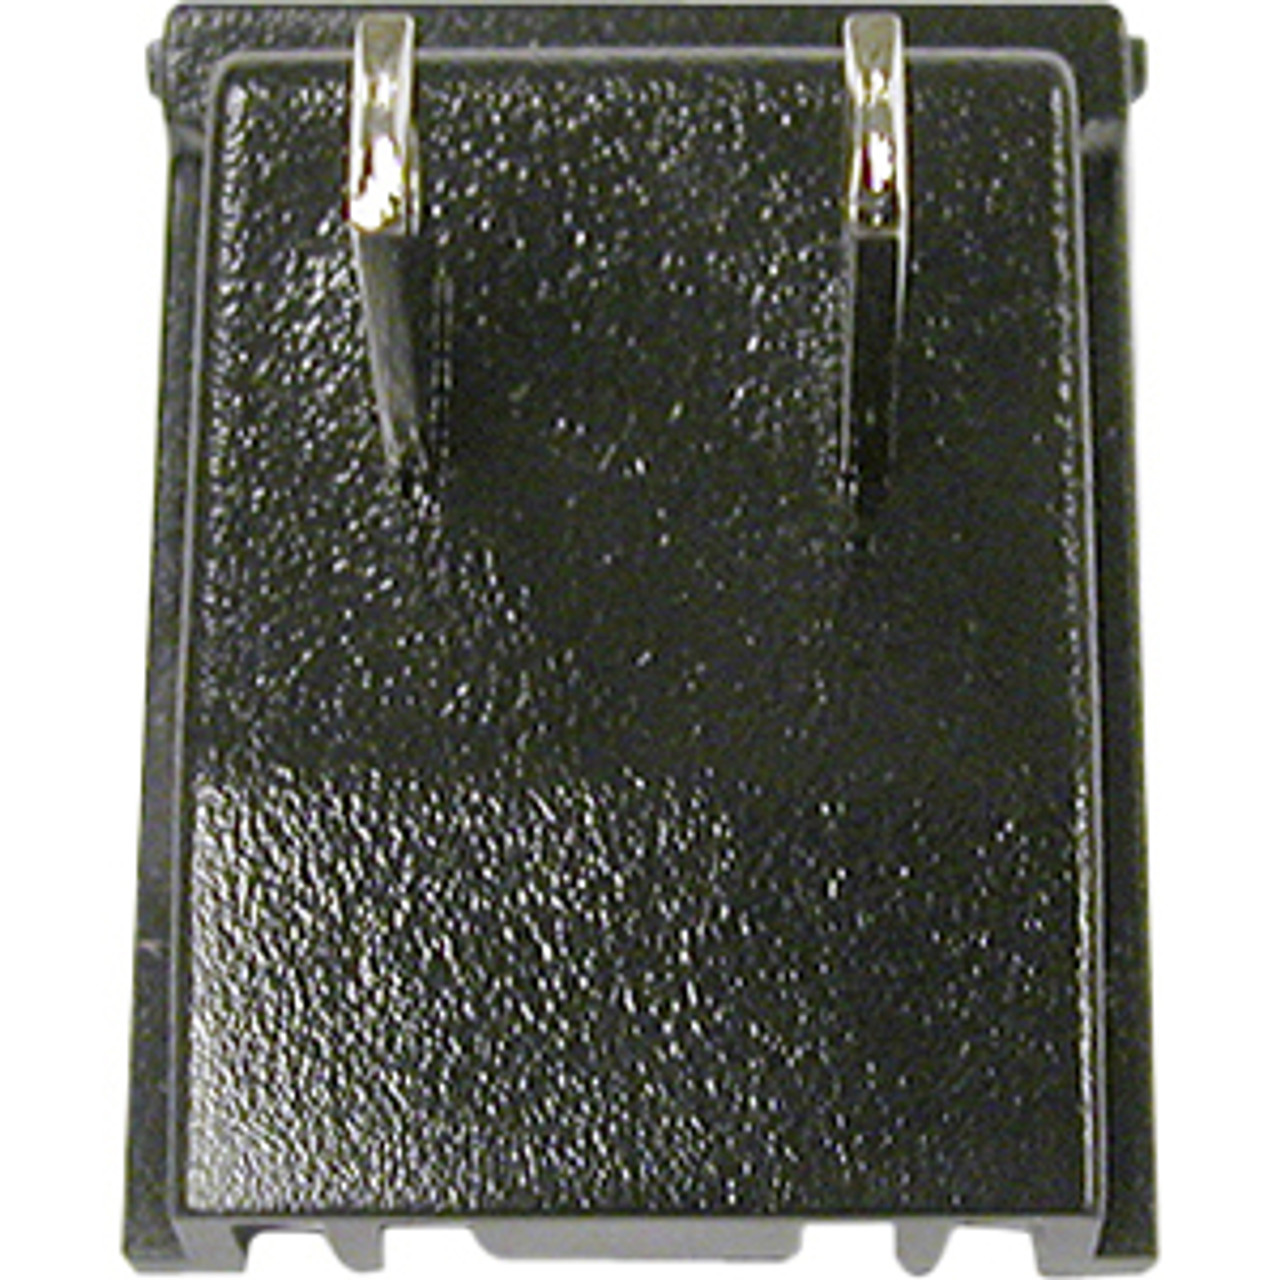 806-00720-00 IMC Power Adapter Clip (usa) For 806-39720